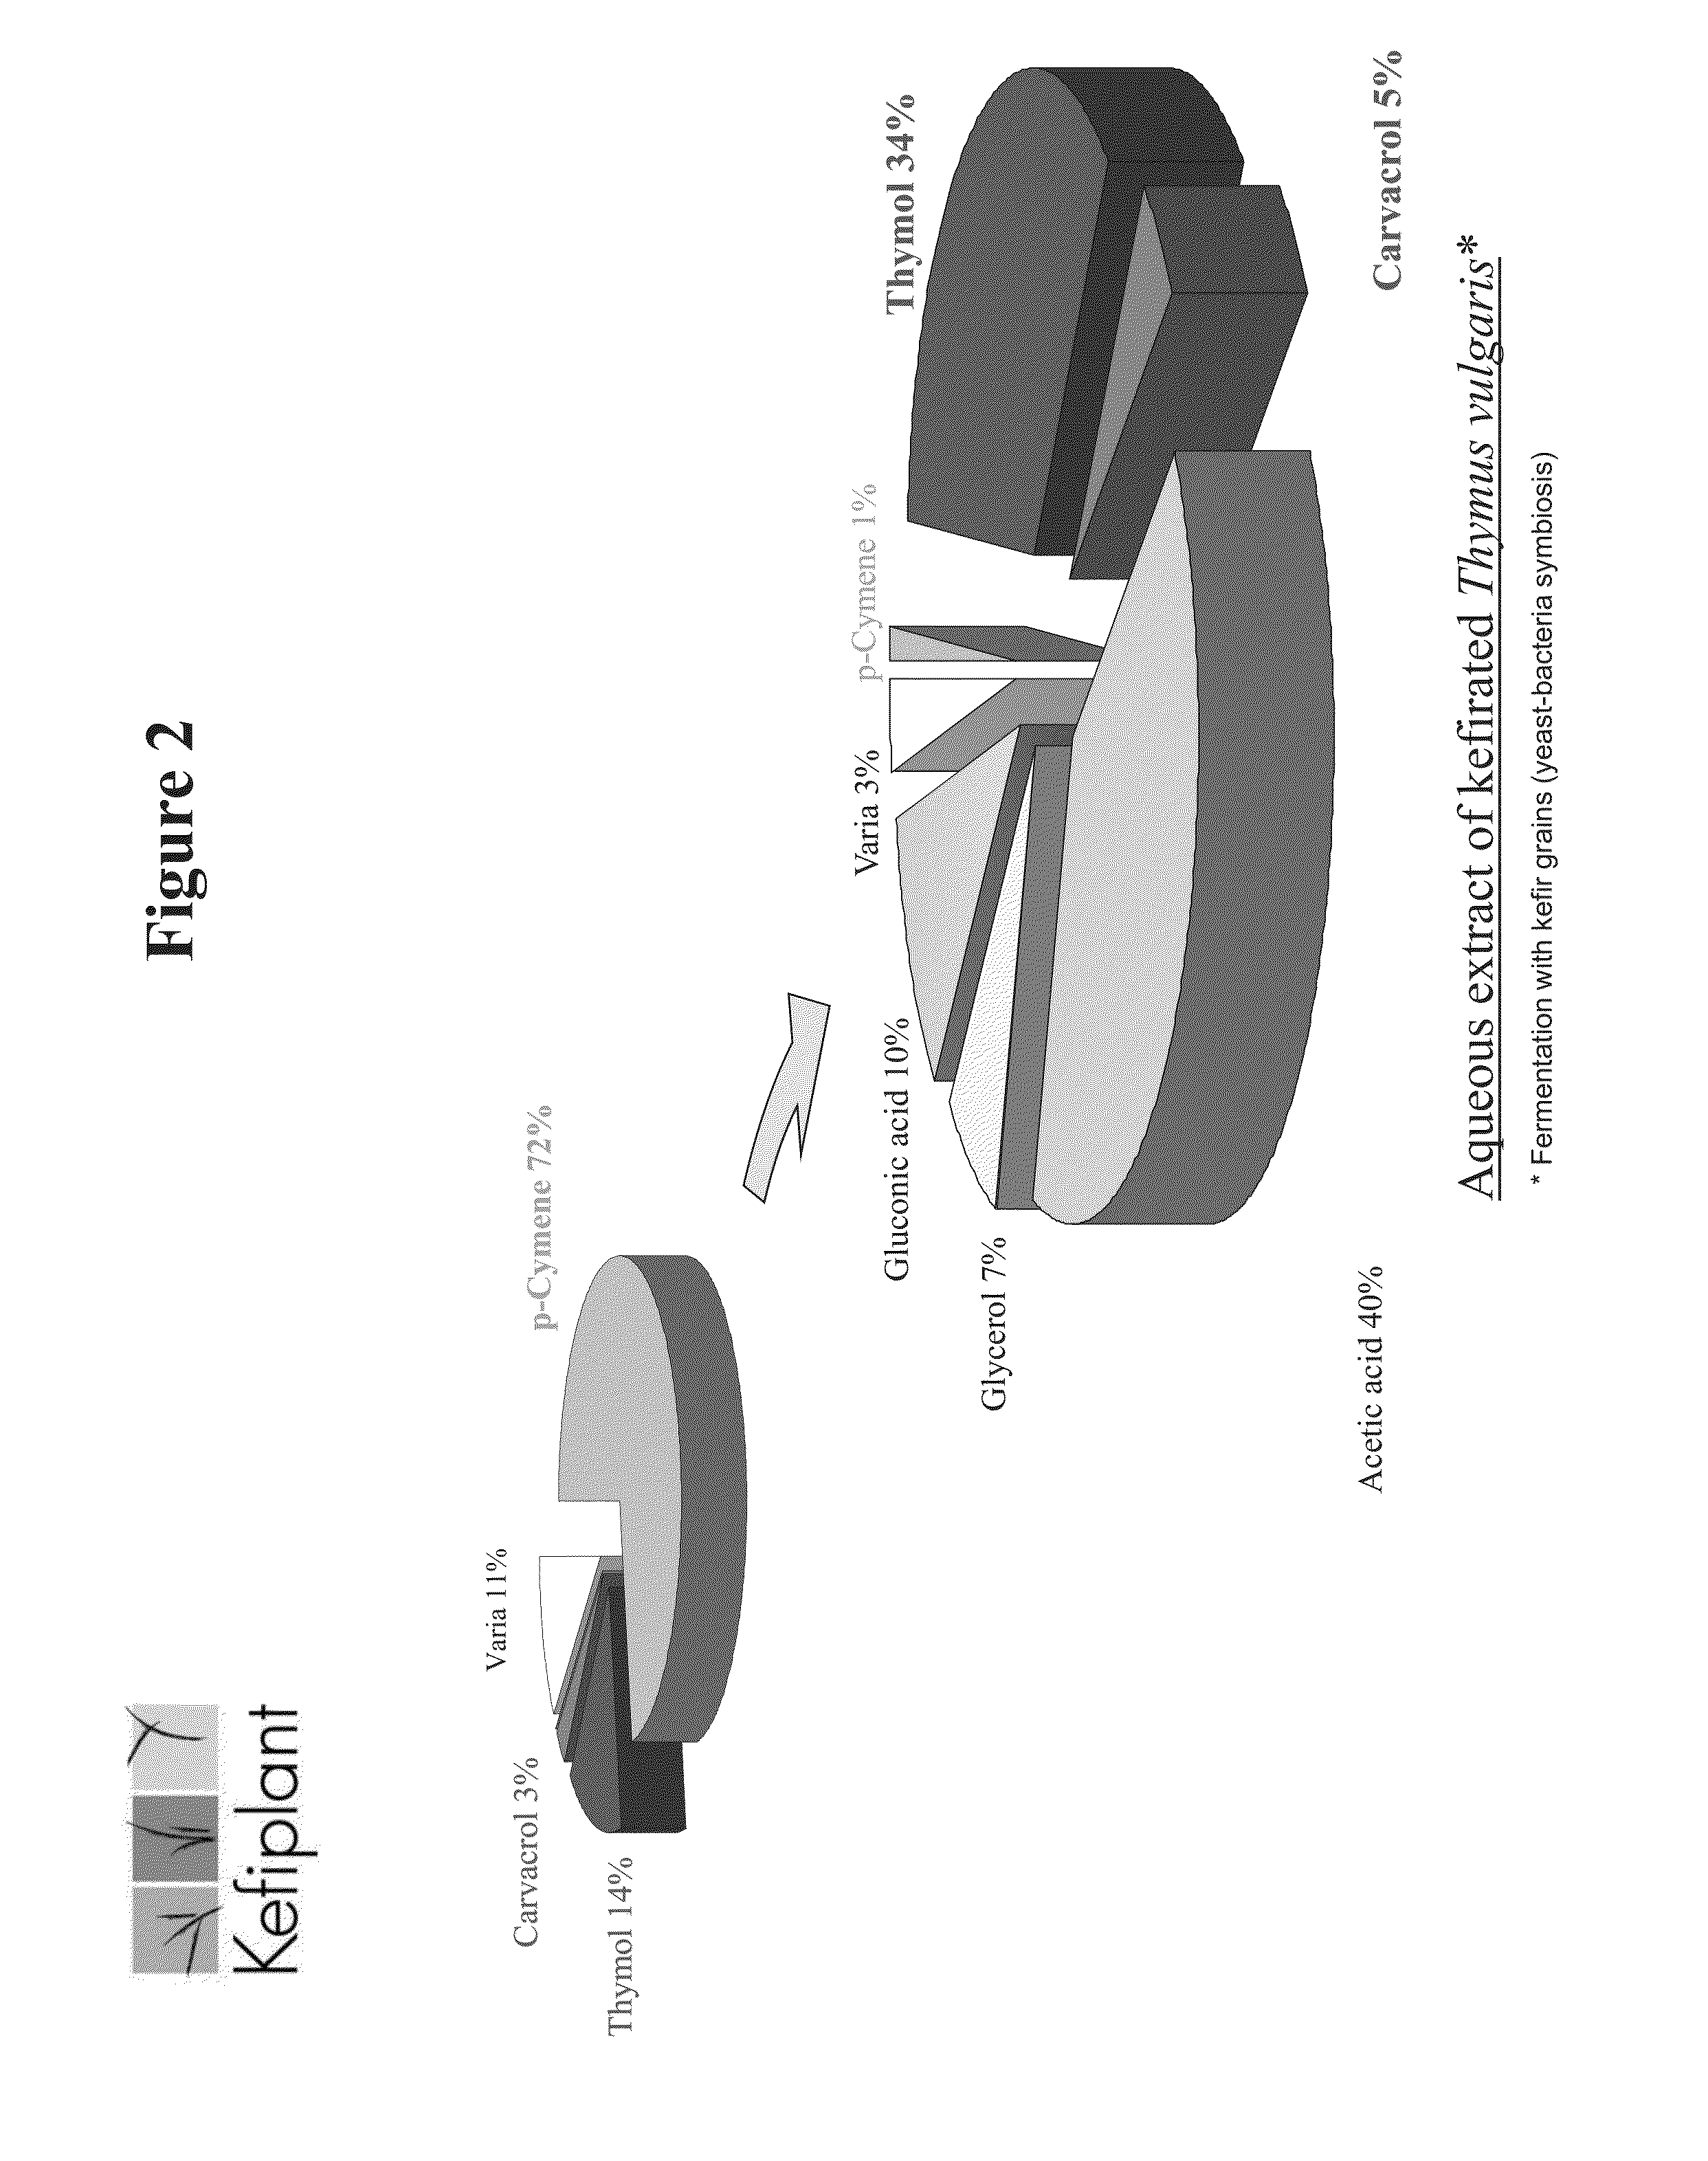 Fermented plant extracts, methods of production and uses